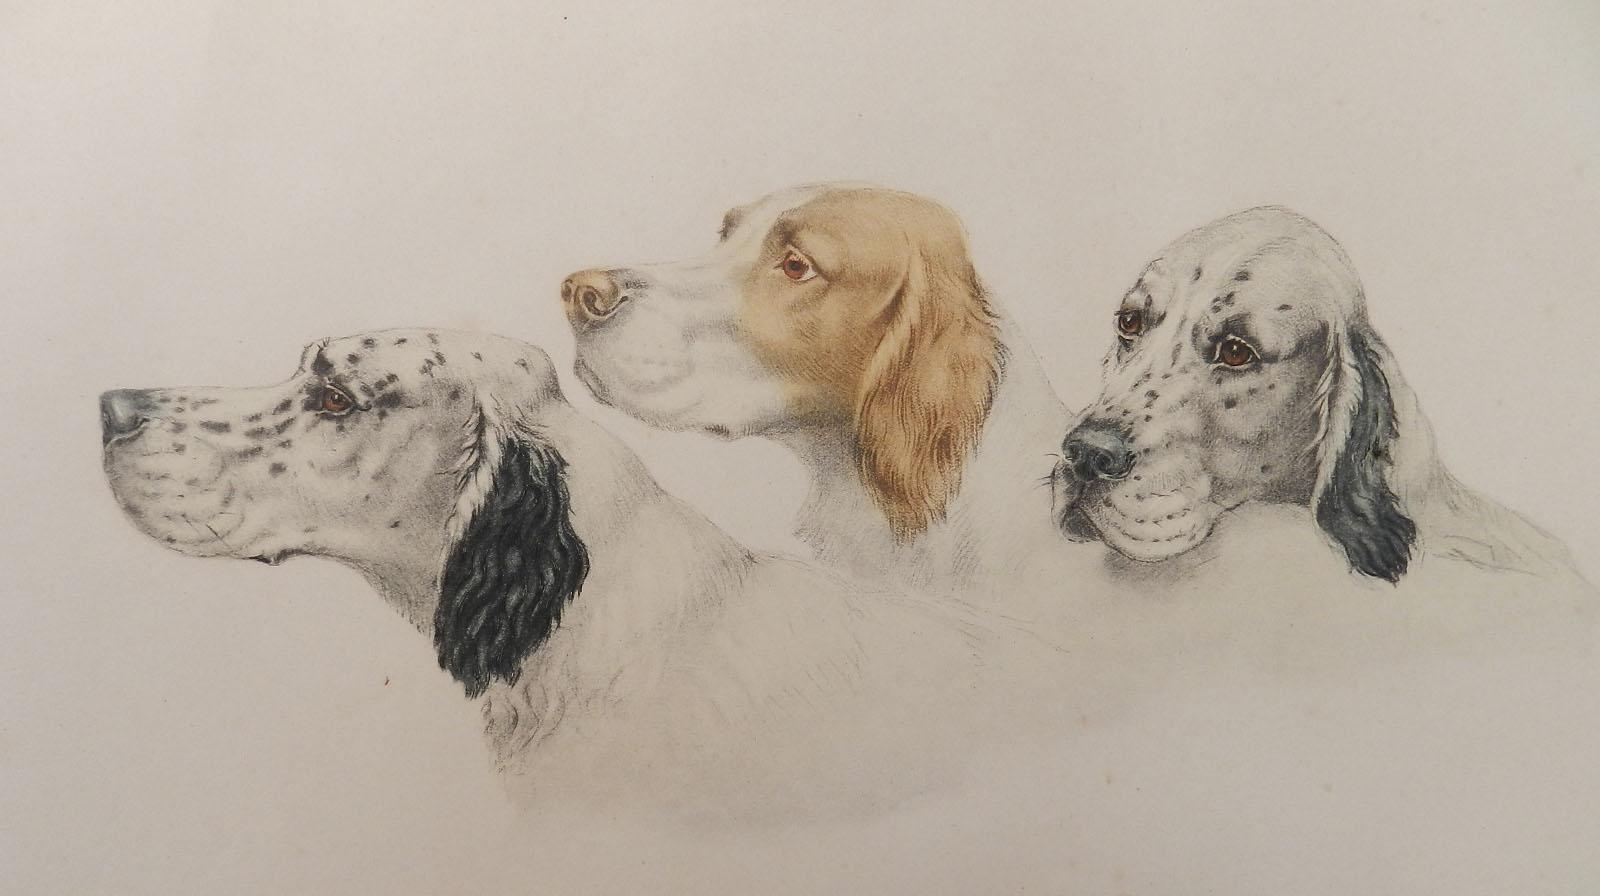 Original Etching of Dogs by Leon Danchin Setters
Hand signed in pencil by the artist Leon Danchin and was published by Leon Danchin, Paris  1938
Coloured aquatint Etching on cartridge paper unframed
Minor marks of age, there is a feint water mark to